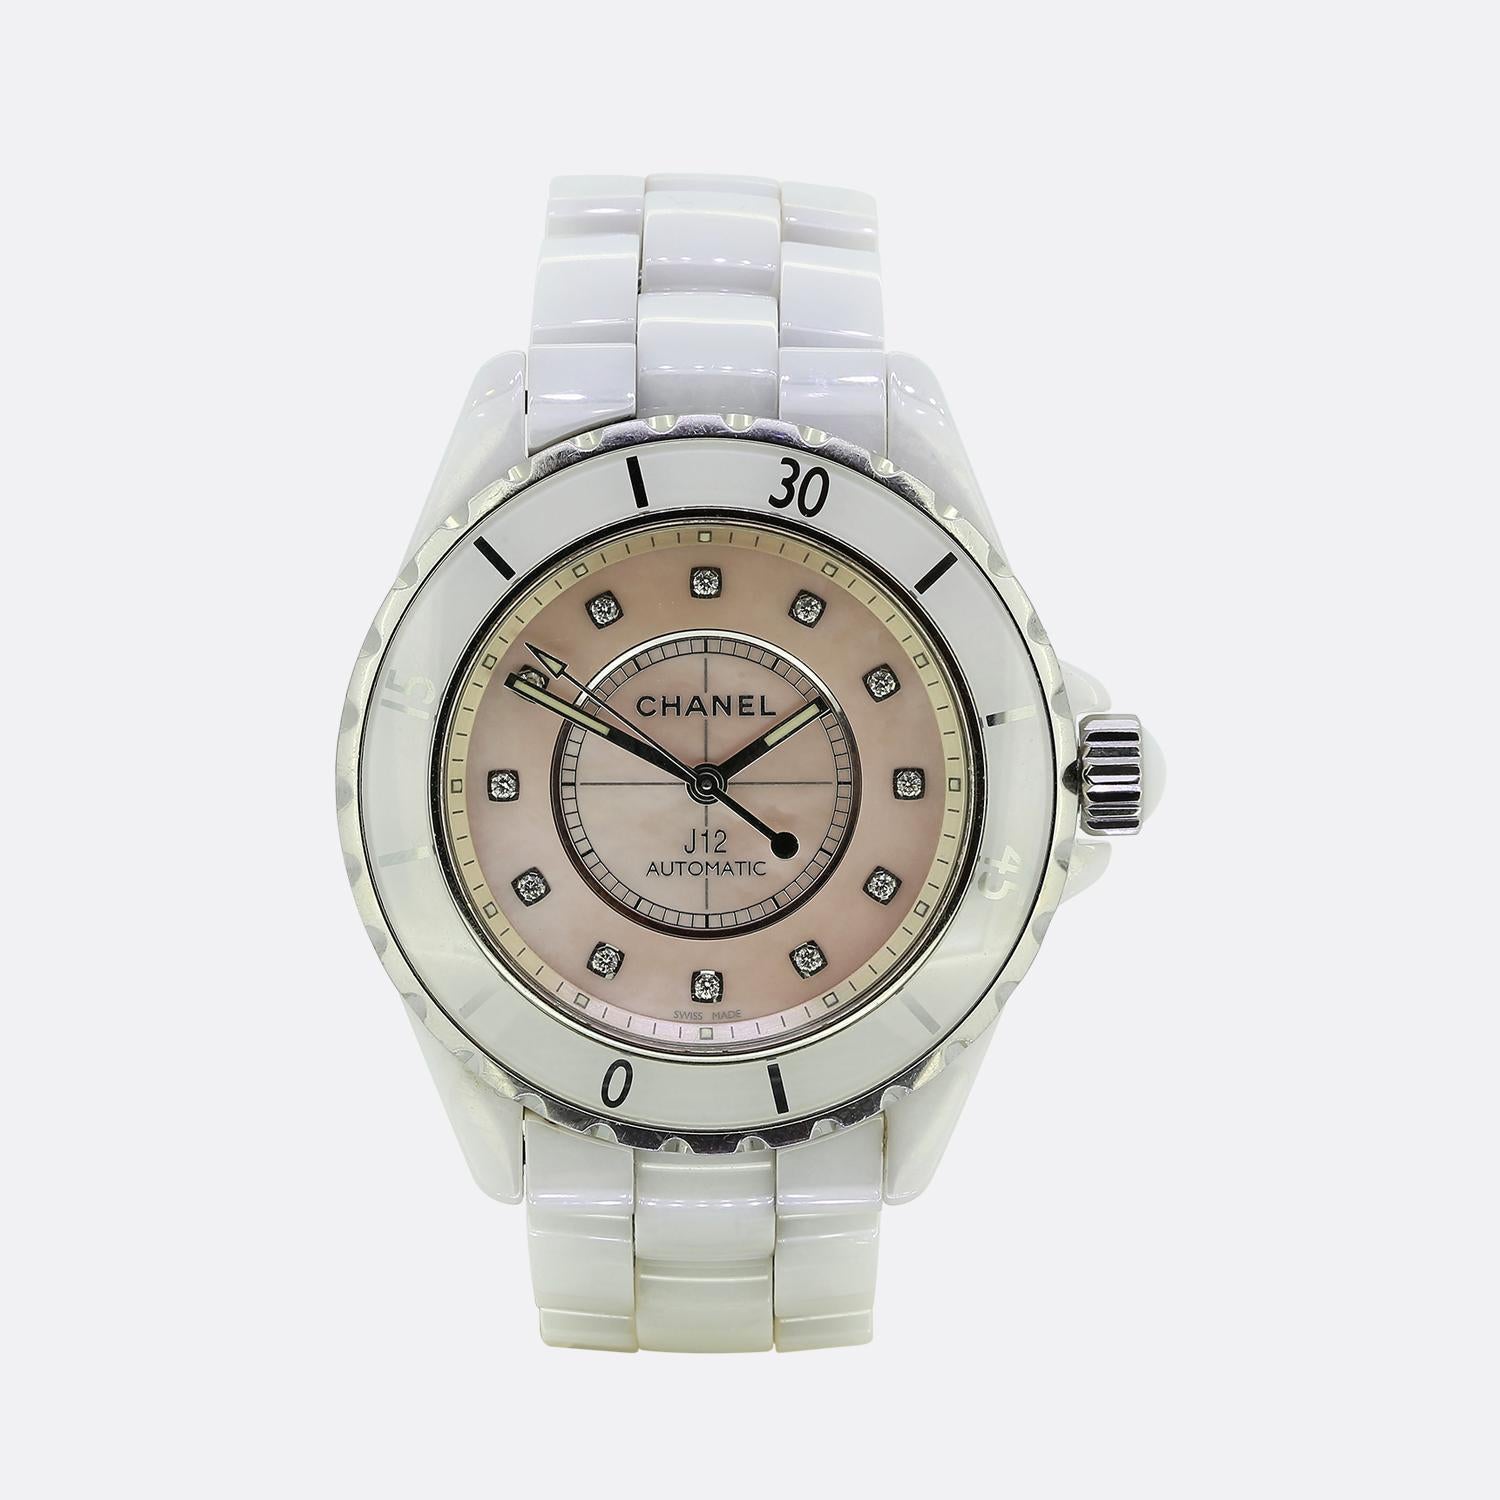 Here we have a white ceramic Chanel J12 automatic ladies wristwatch featuring a pink mother of pearl dial which features 12 round brilliant cut diamond time indications and silver hands with a luminescent fill. The watch also features a